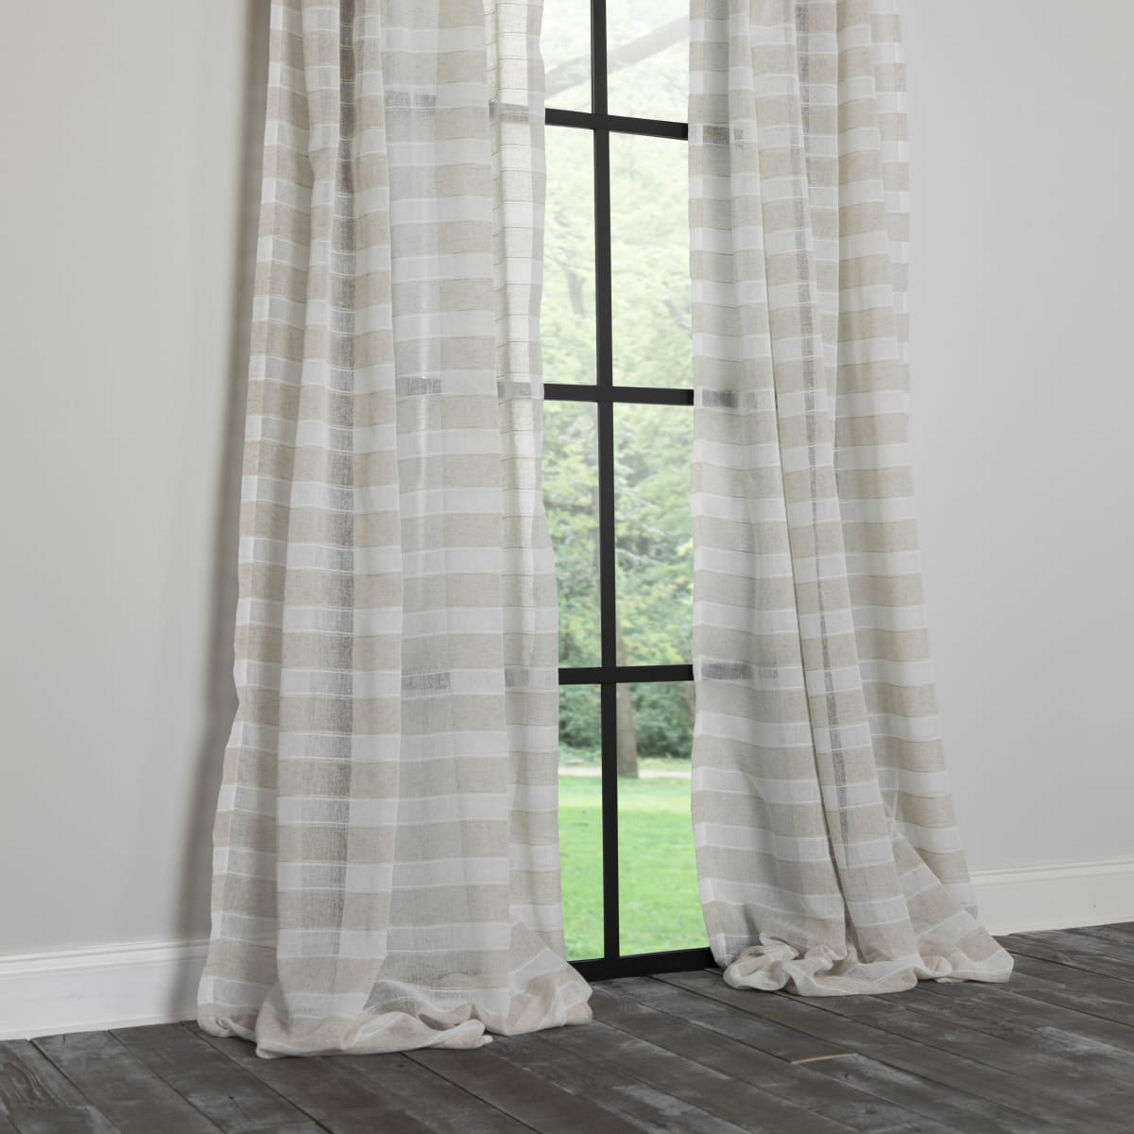 Manor Luxe, Danielle Sheer Rod Pocket Curtain Single Panel, 54 by 120-Inch - Image 2 of 2